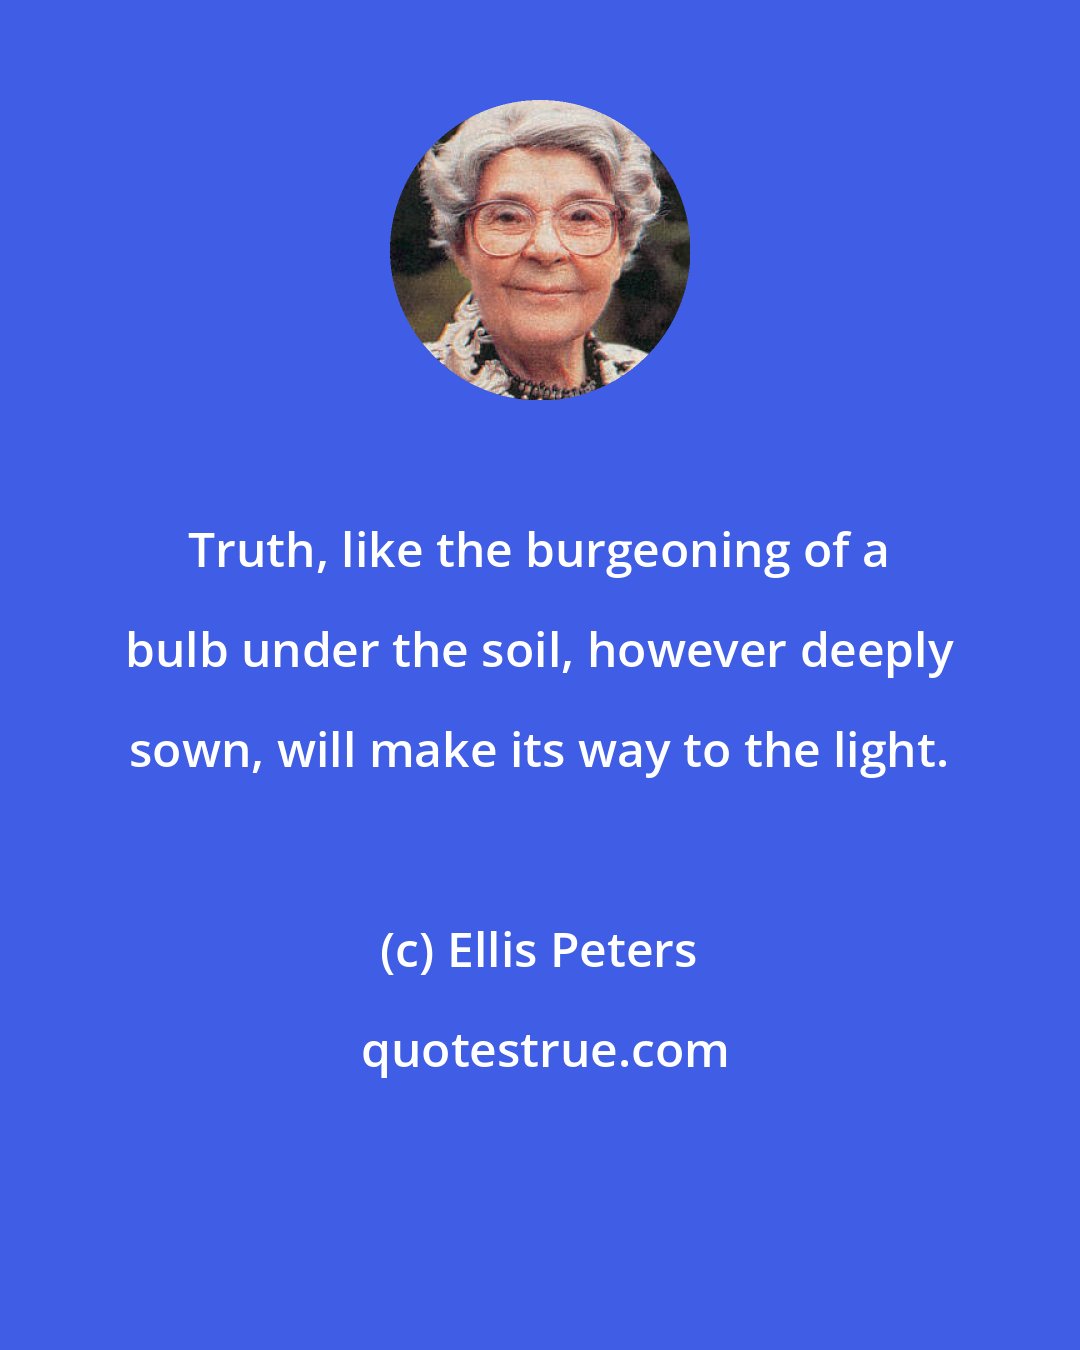 Ellis Peters: Truth, like the burgeoning of a bulb under the soil, however deeply sown, will make its way to the light.